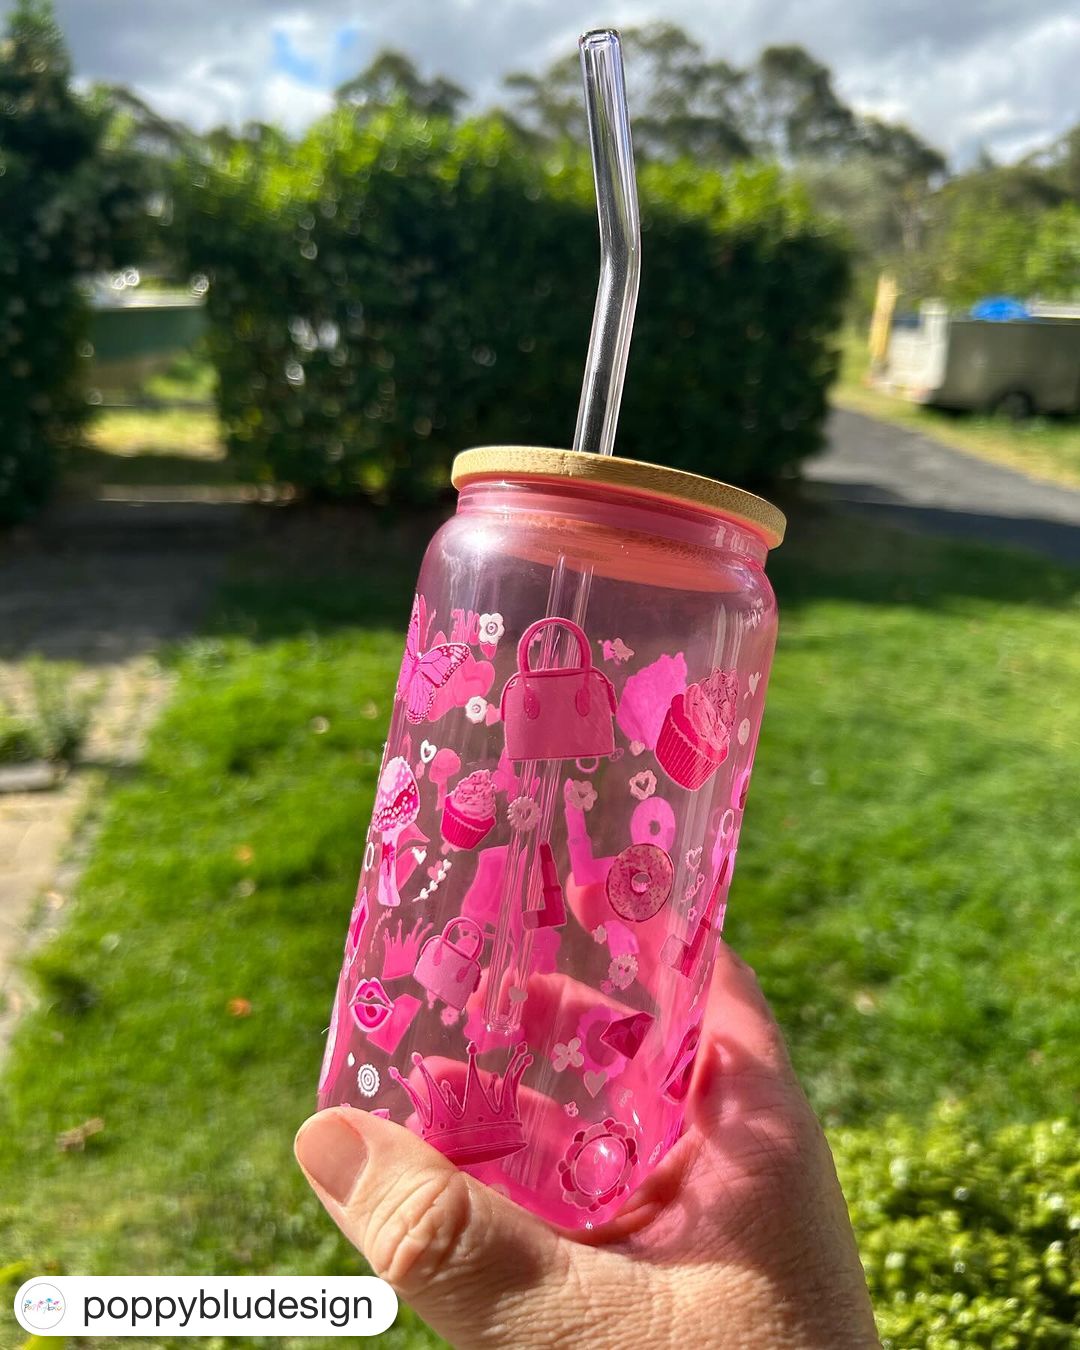 Pink Blank Can Glass with Bamboo Lid and Clear Straw Low Stock | Arriving Mid to Late November - Only The Sweet Stuff